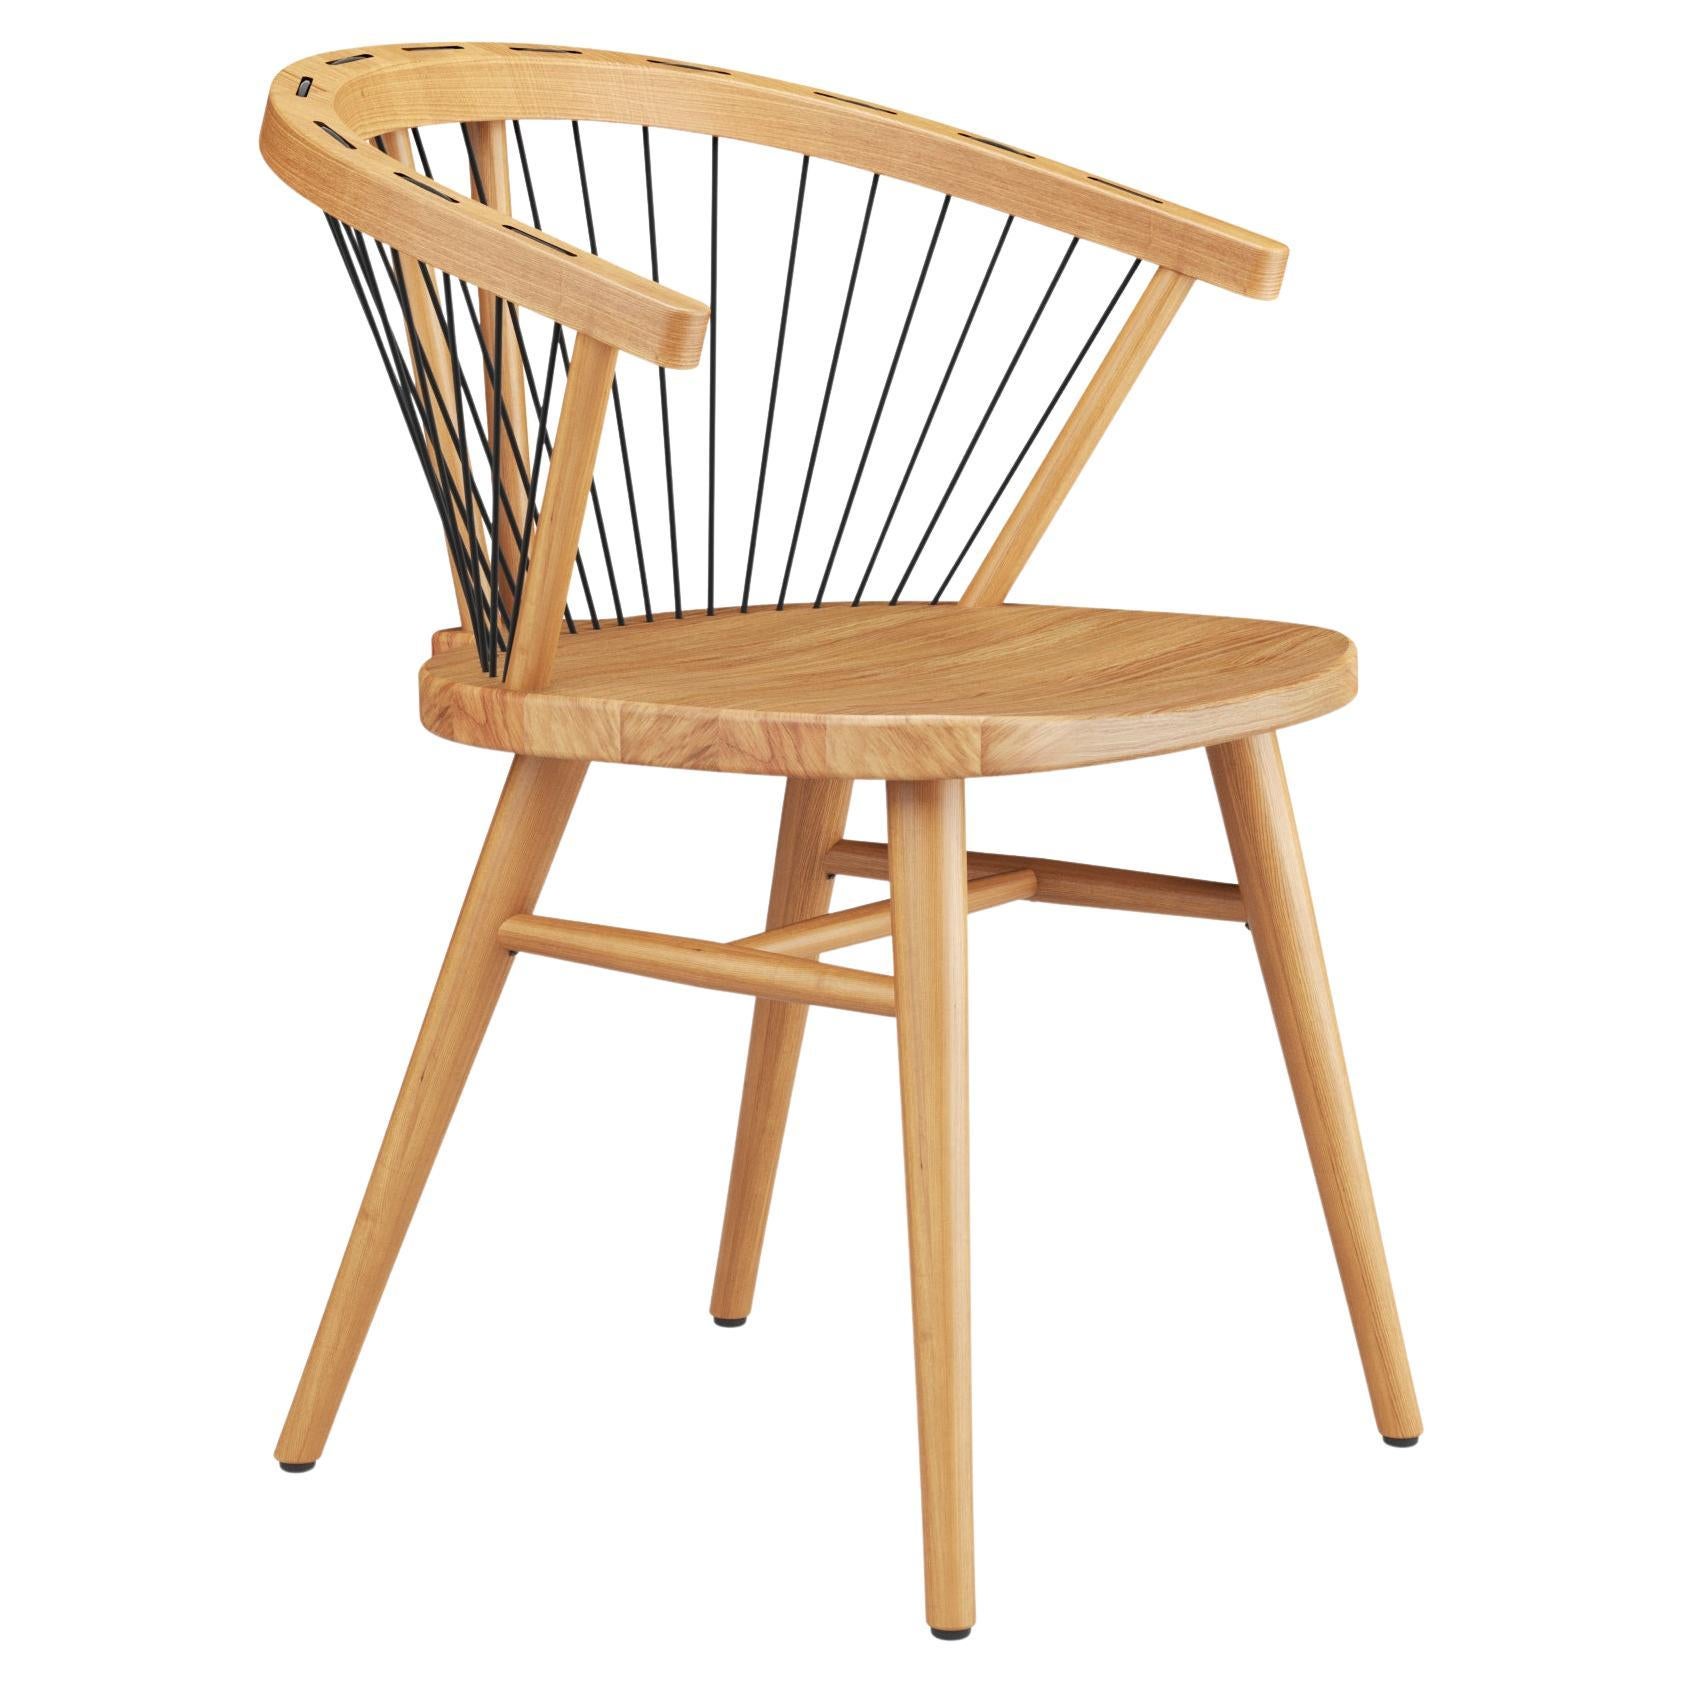 Hayche Cuerdas Rounded chair, Oak & Black, UK, Made To Order For Sale